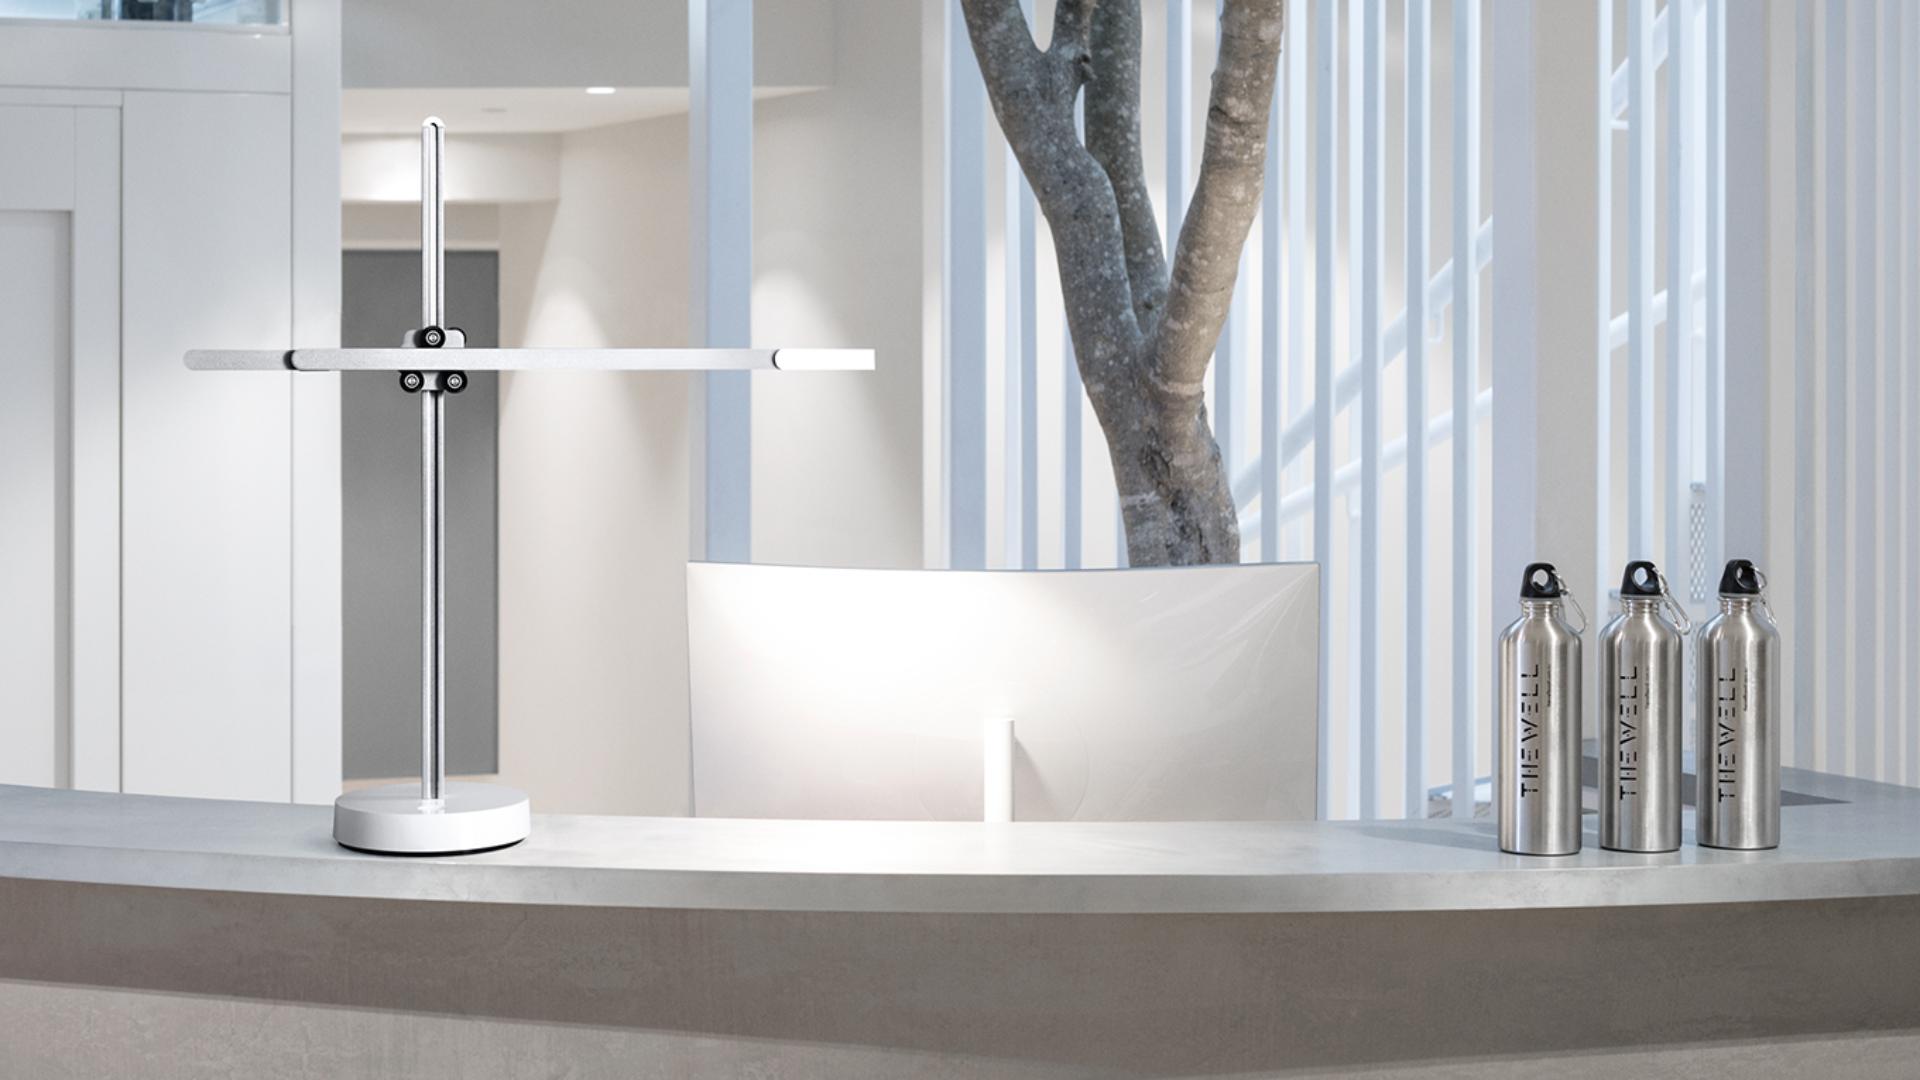 Dyson CSYS™ light on The Well's reception desk